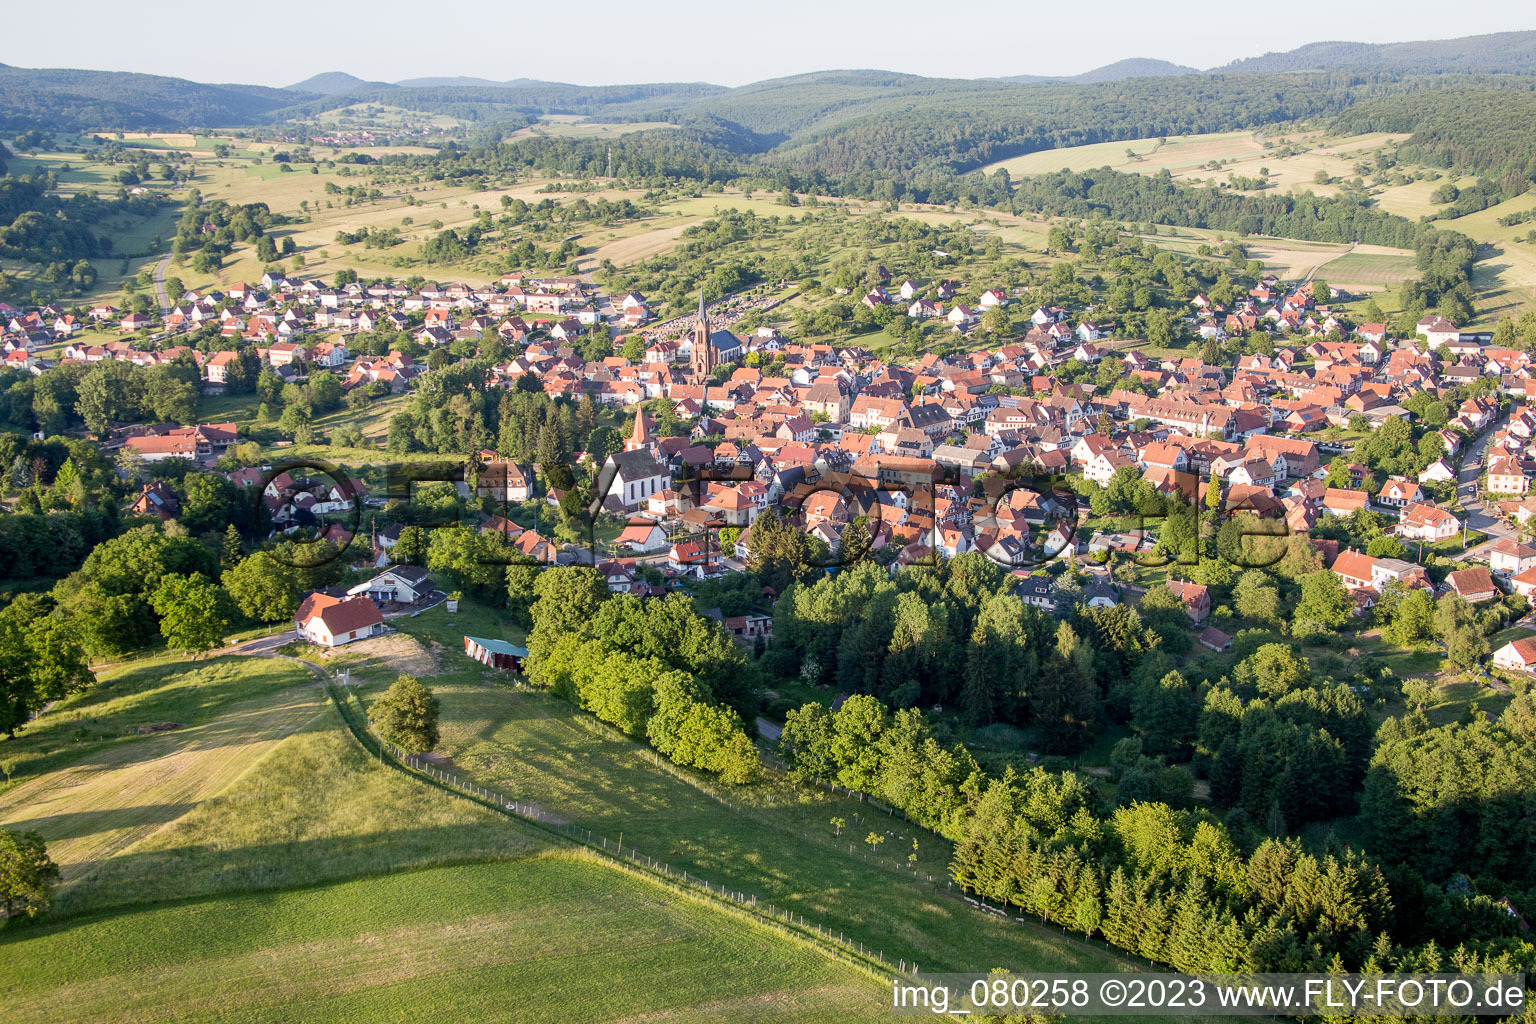 Lembach in the state Bas-Rhin, France from a drone